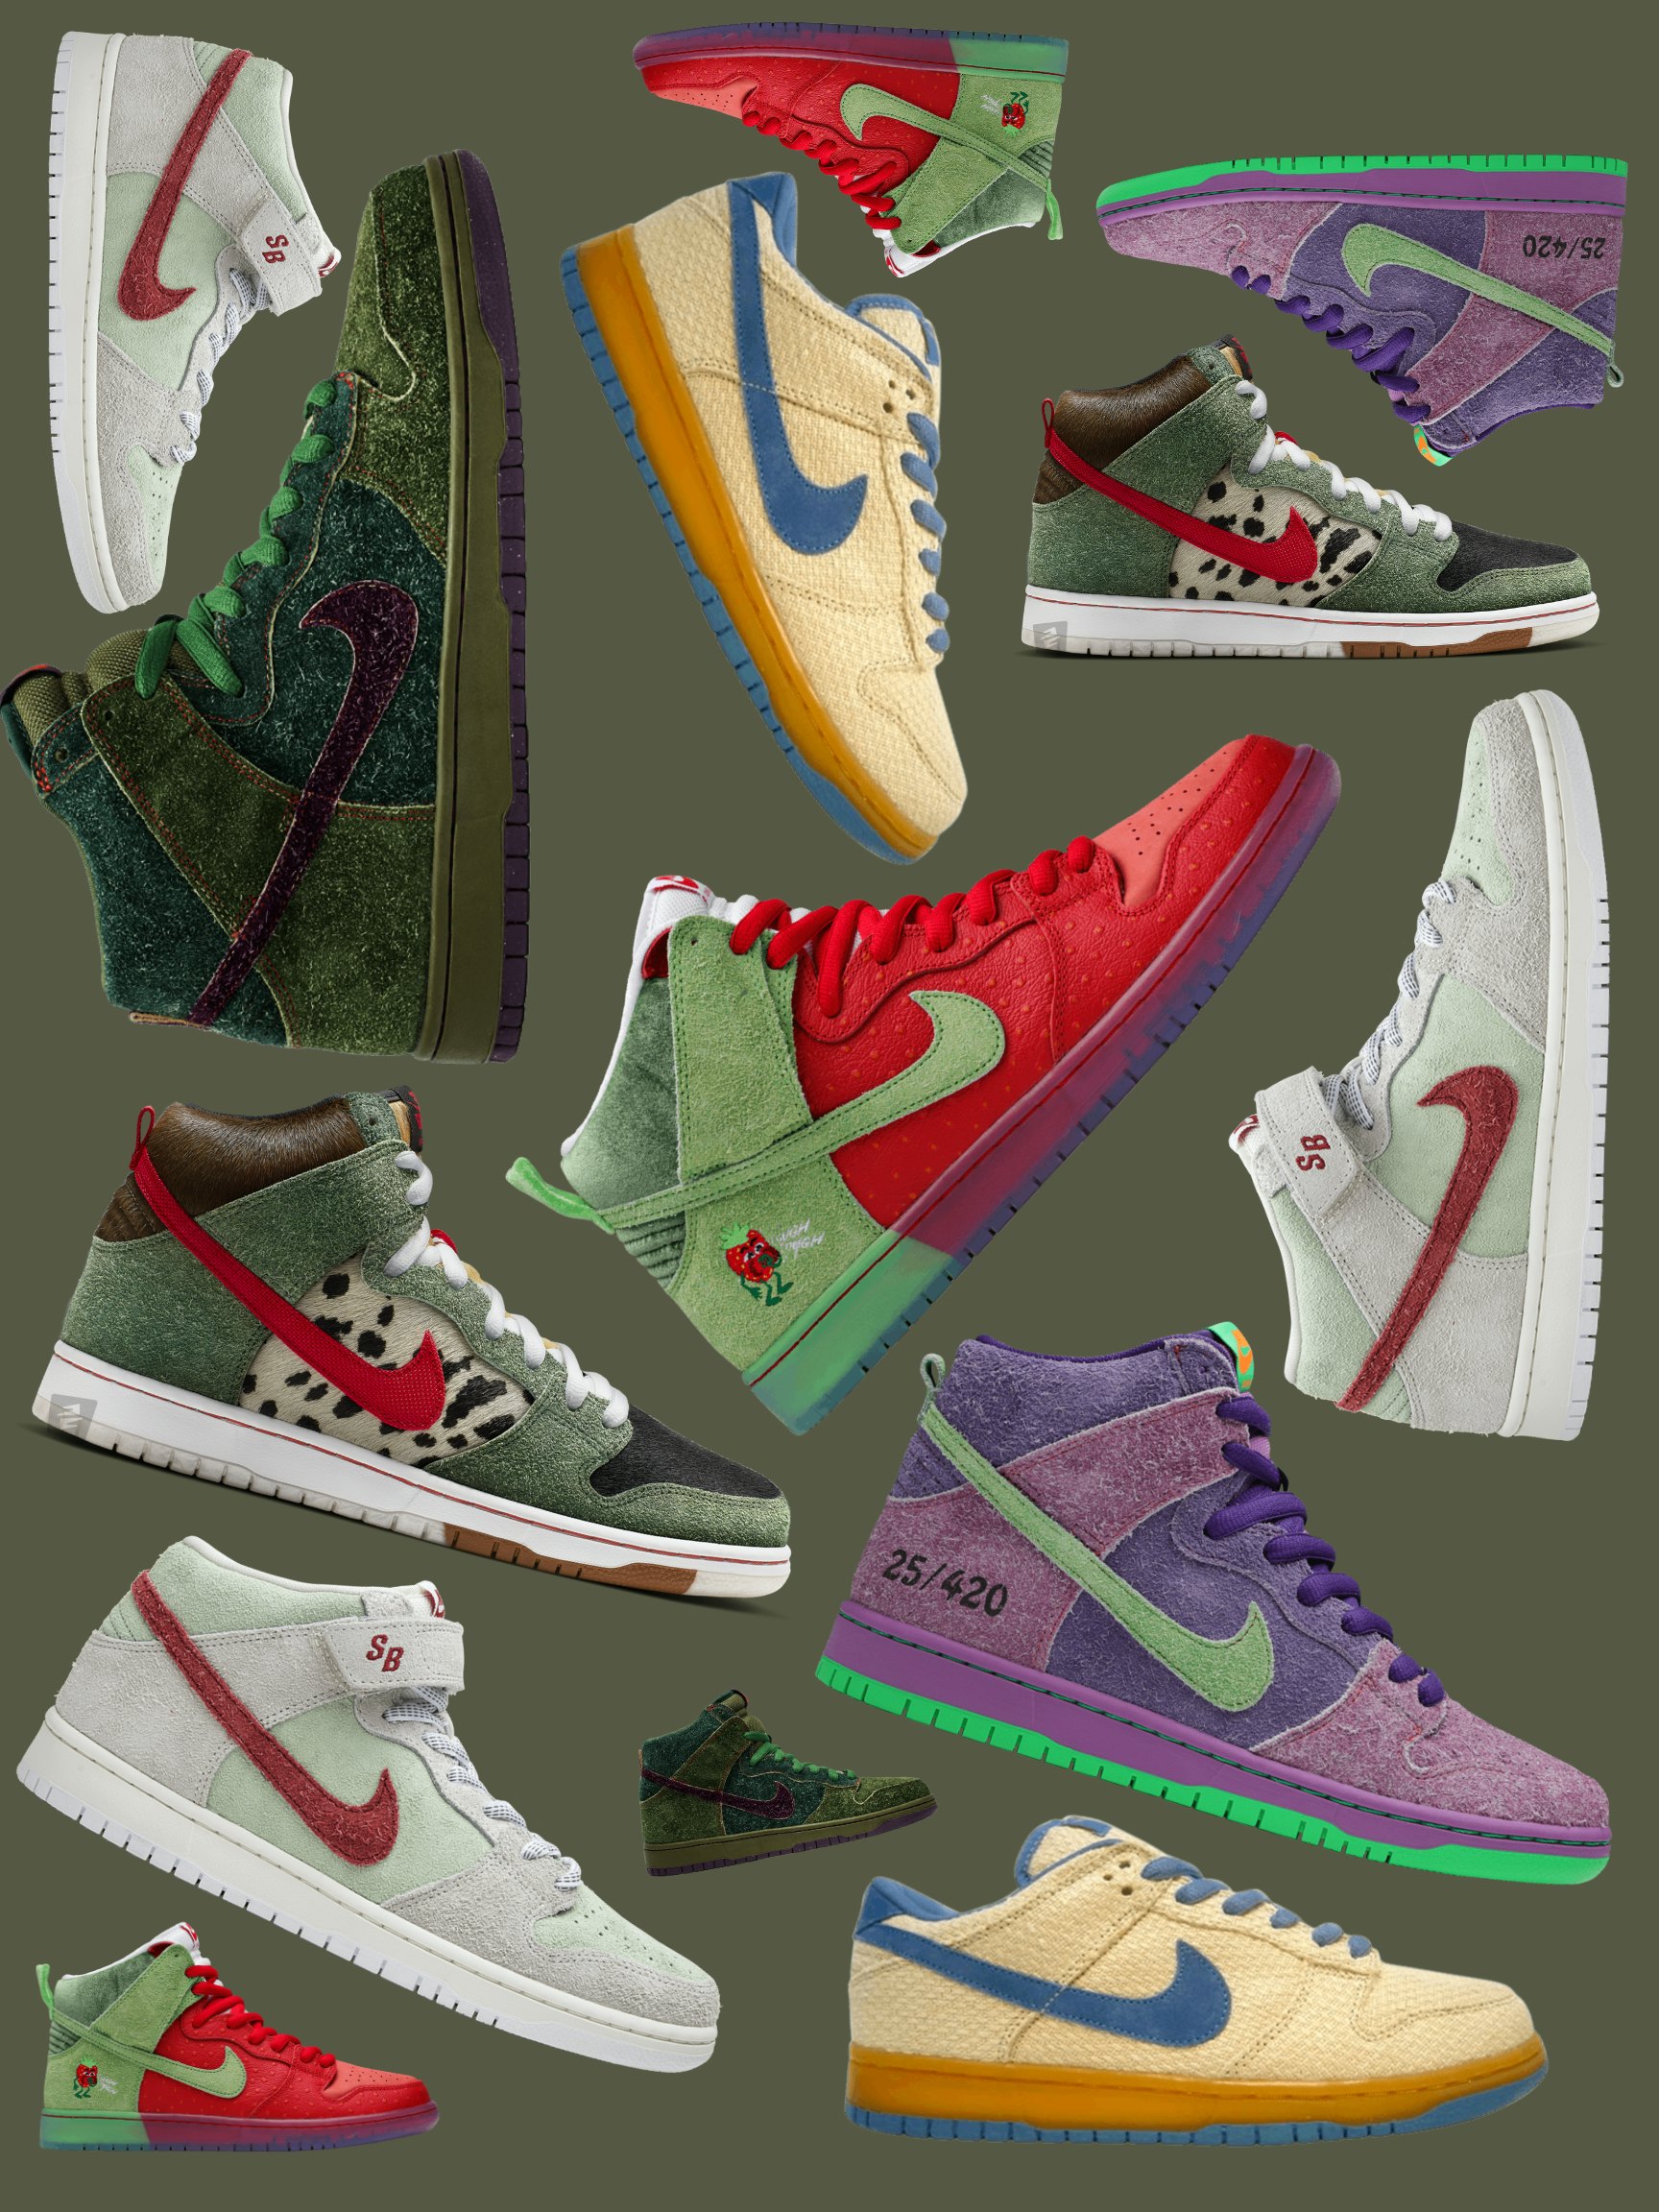 How Nike's 4/20 sneakers went from 